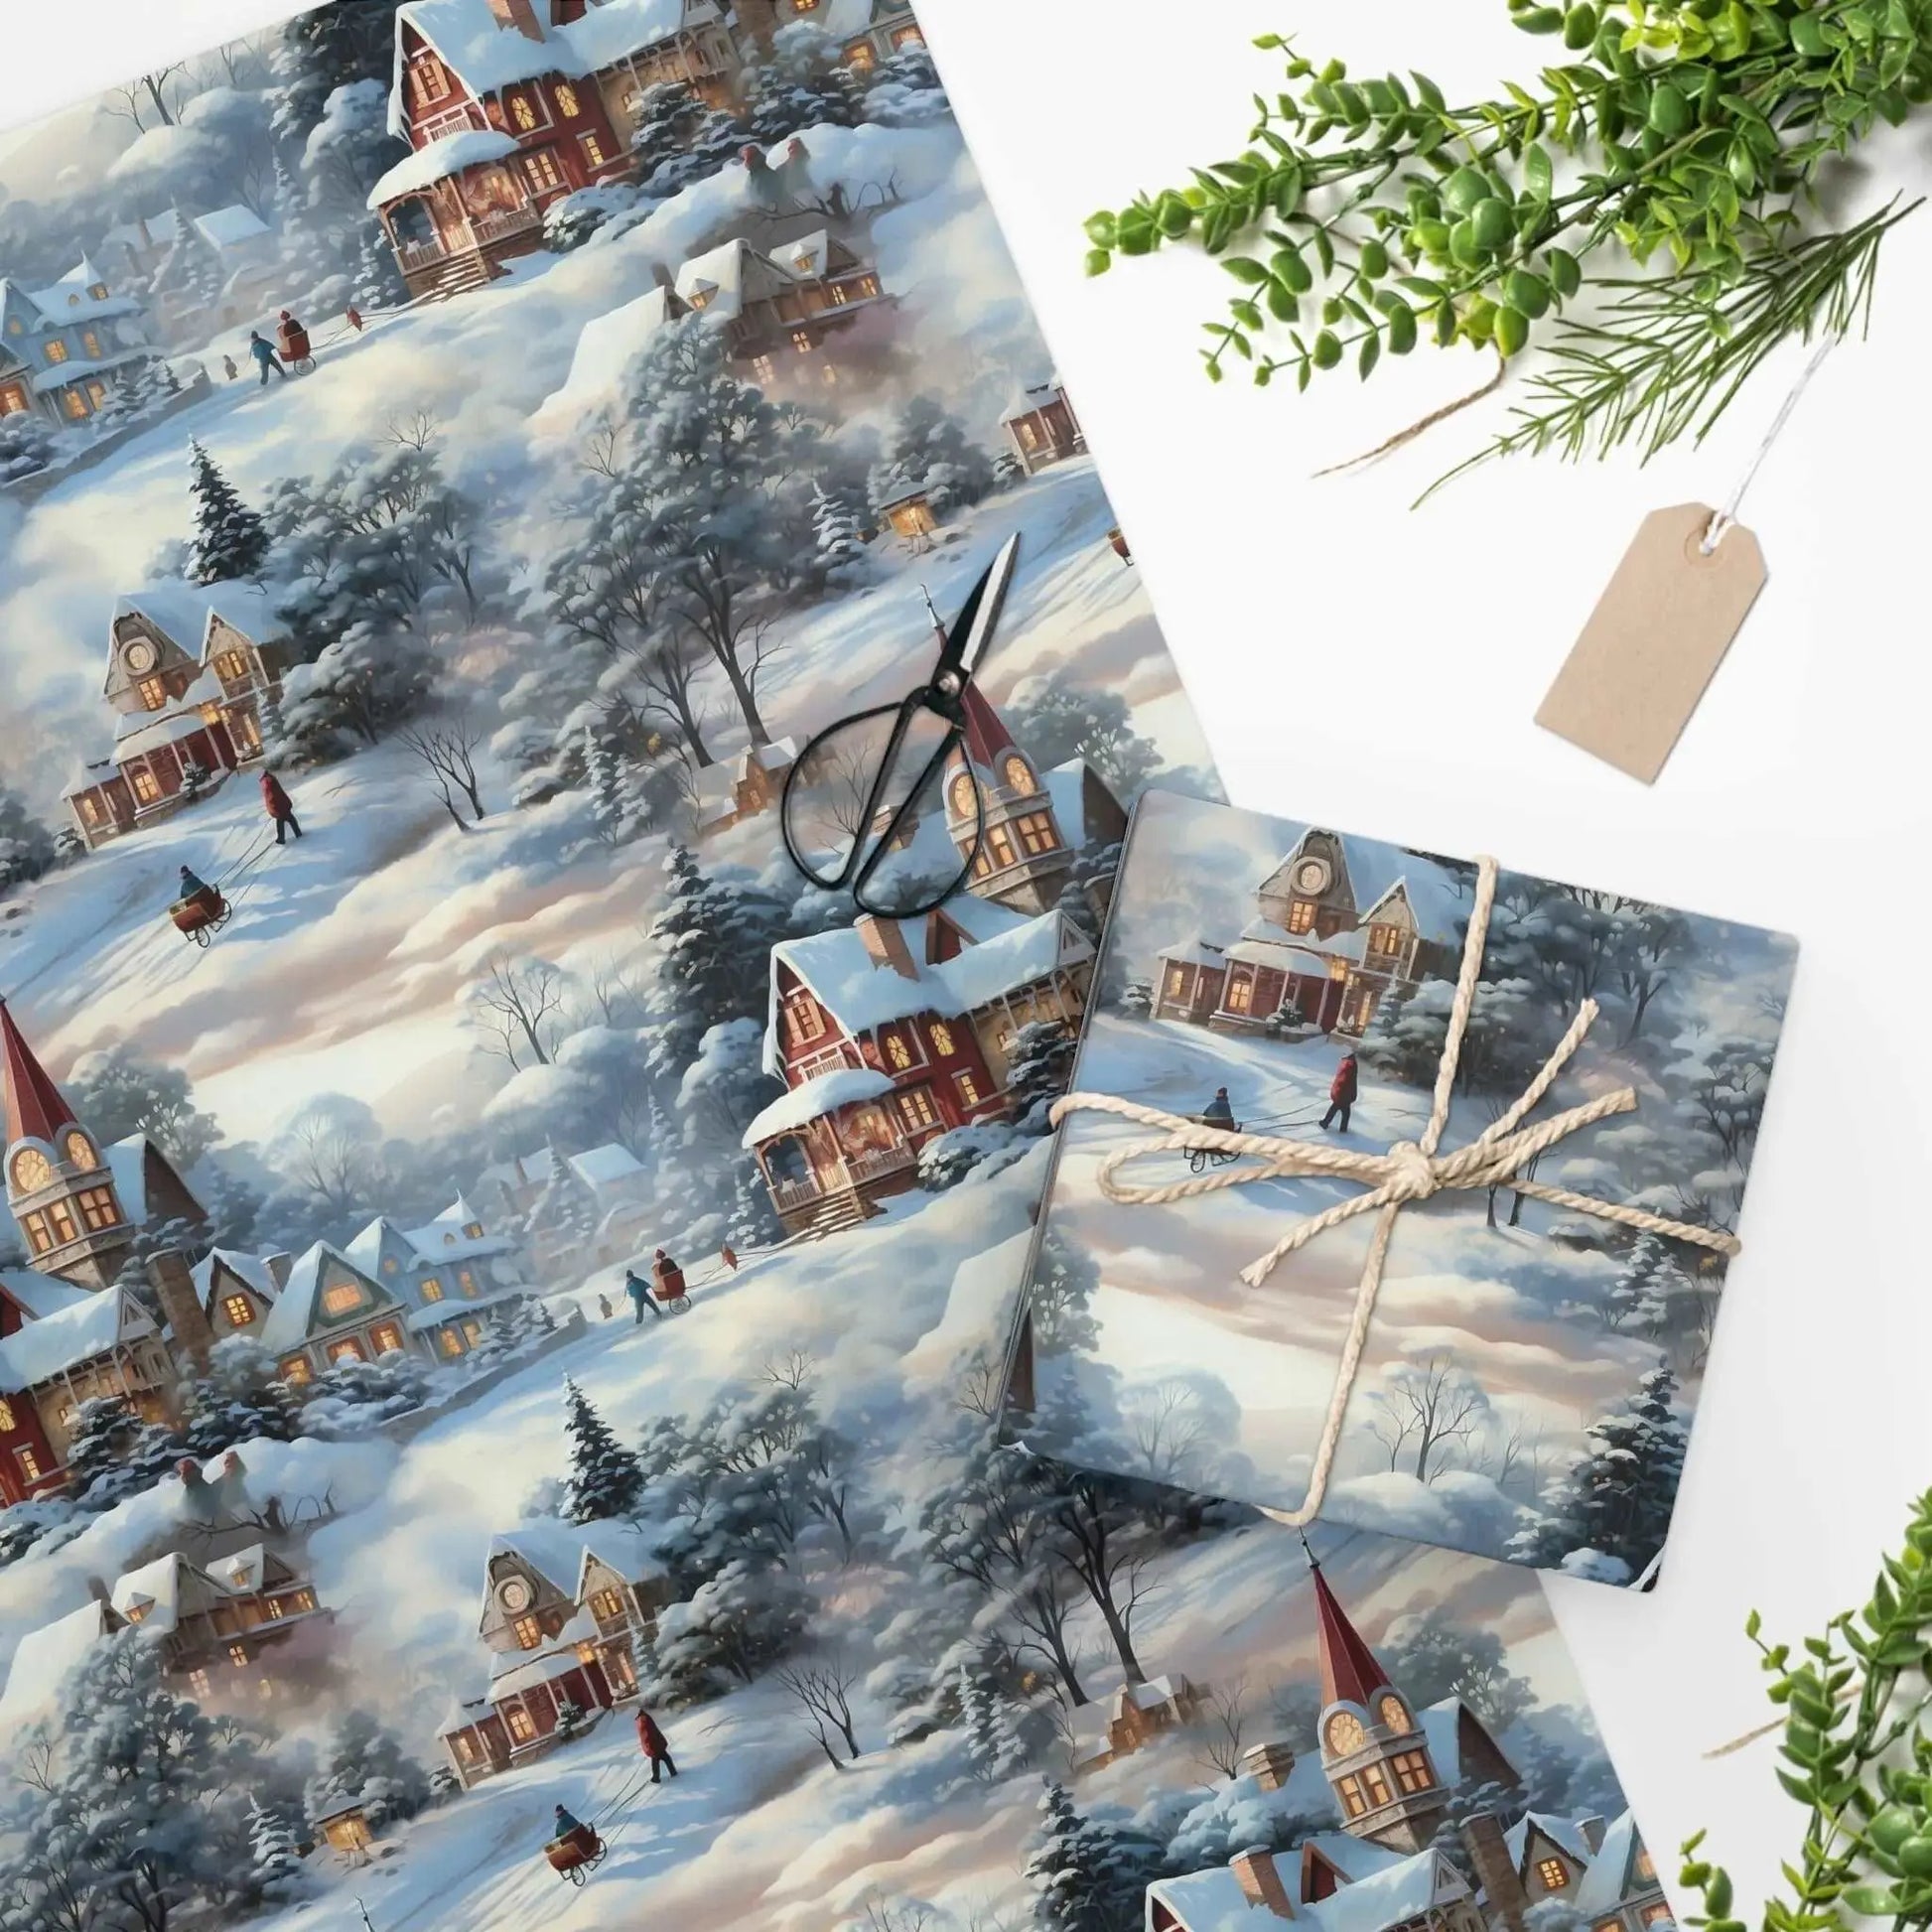 L948🌟Vintage 1940s Christmas Wrapping Paper-VICTORIAN SNOWY VILLAGE 20”x30”